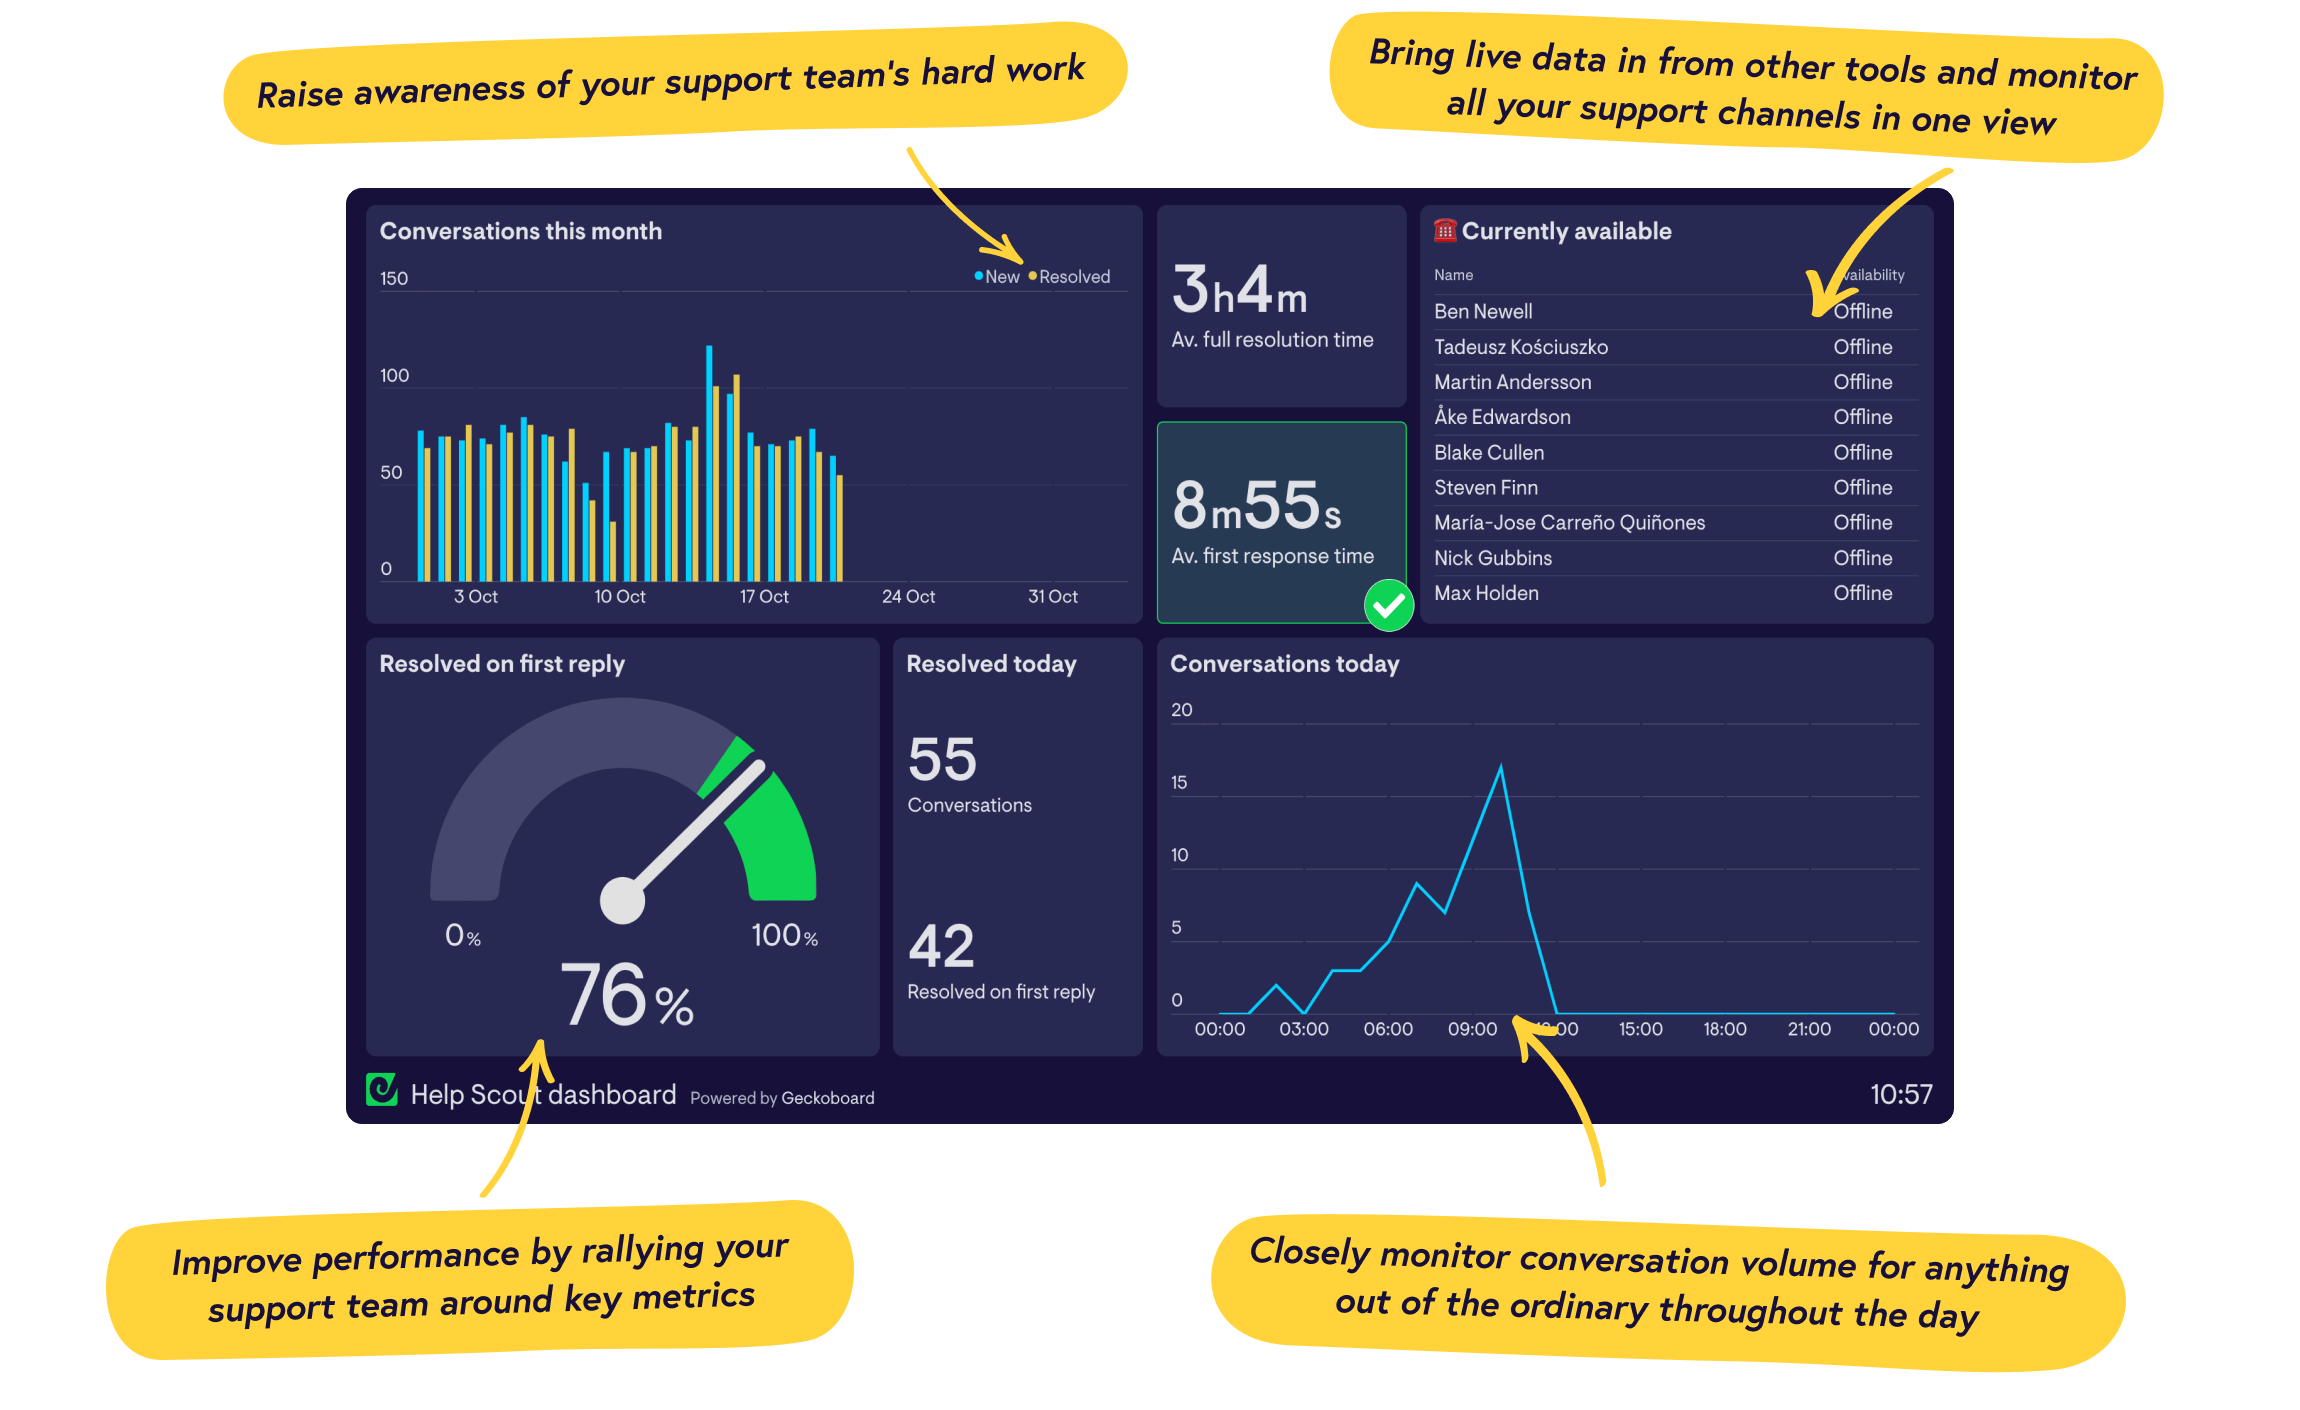 Real-time Help Scout dashboards from Geckoboard